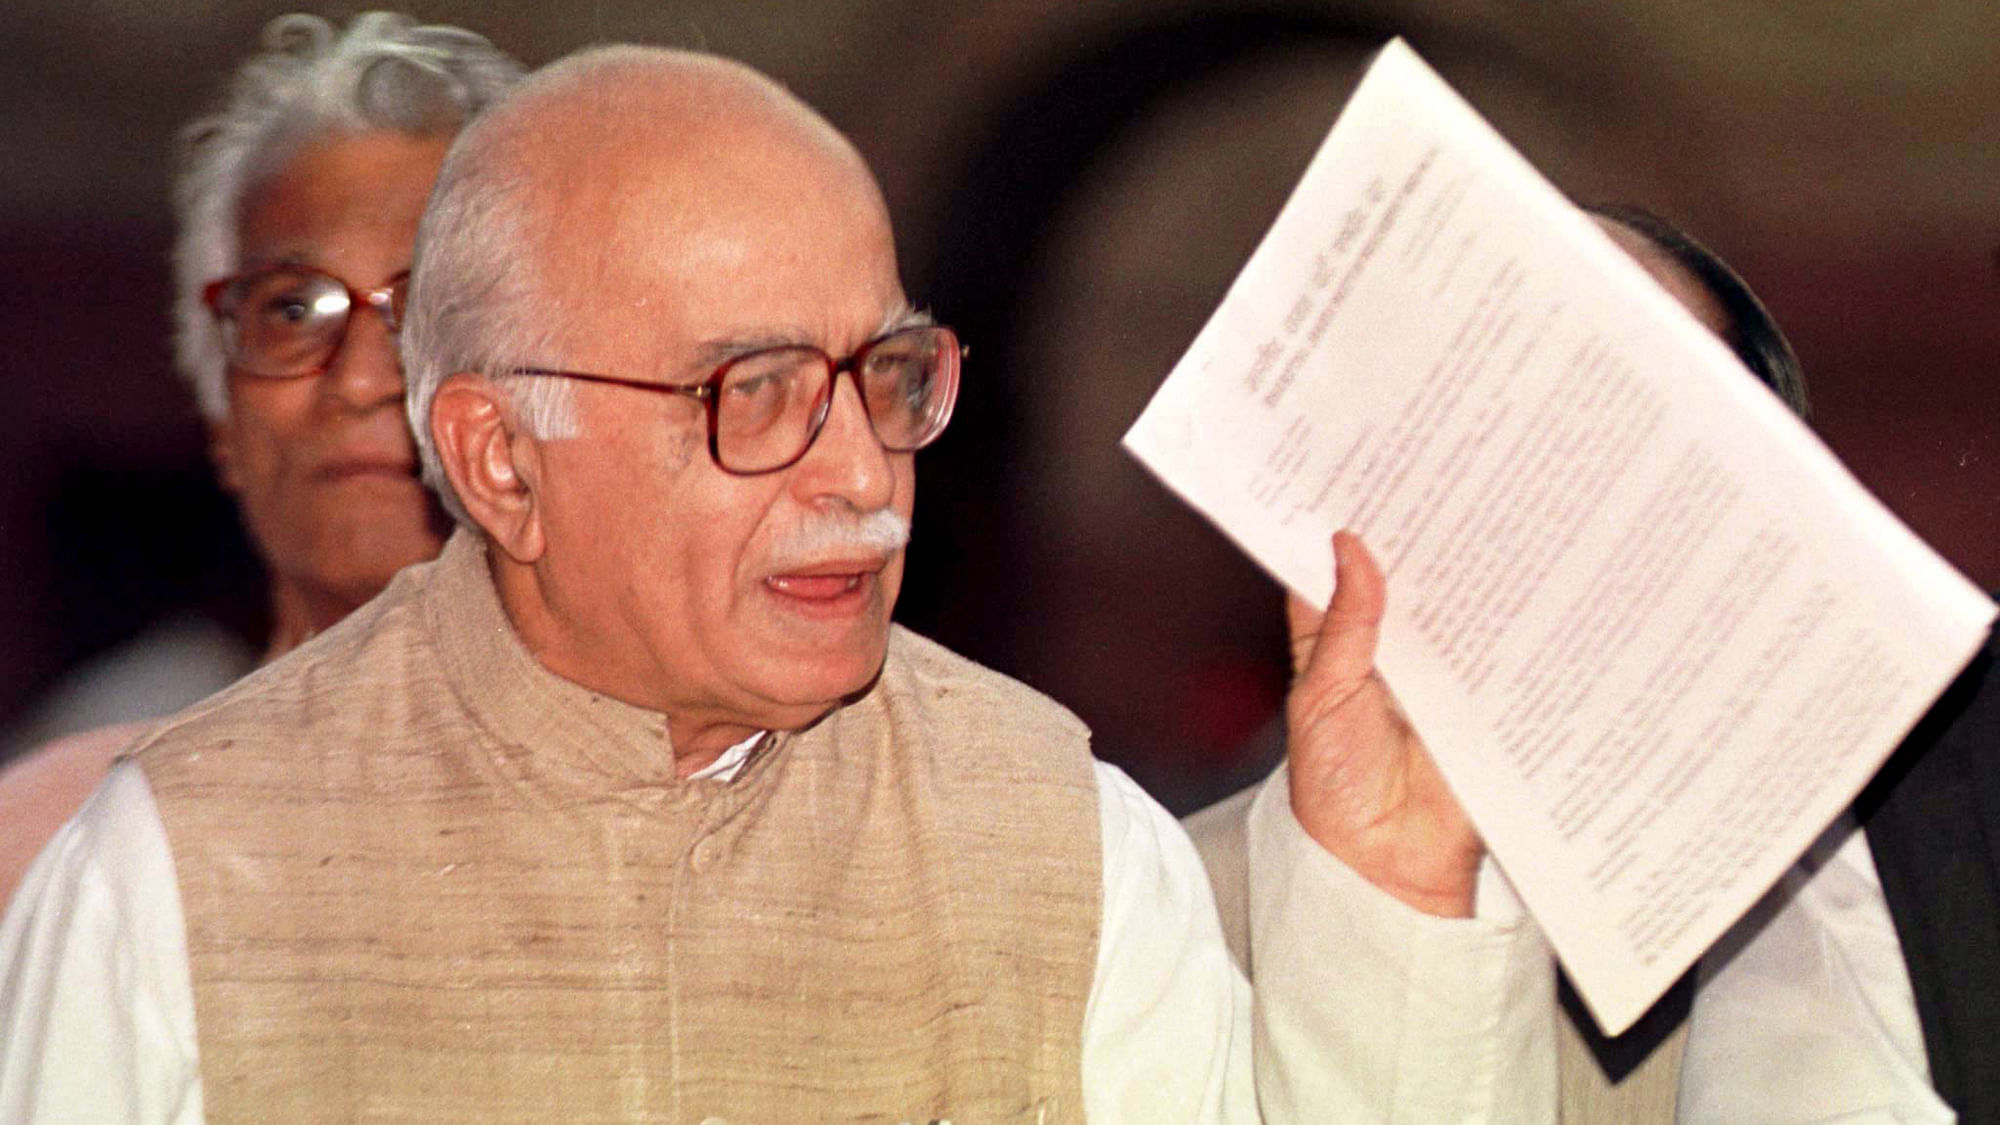 Senior BJP leader LK Advani has claimed that he doesn’t believe the Emergency couldn’t happen again. (Photo: Reuters)